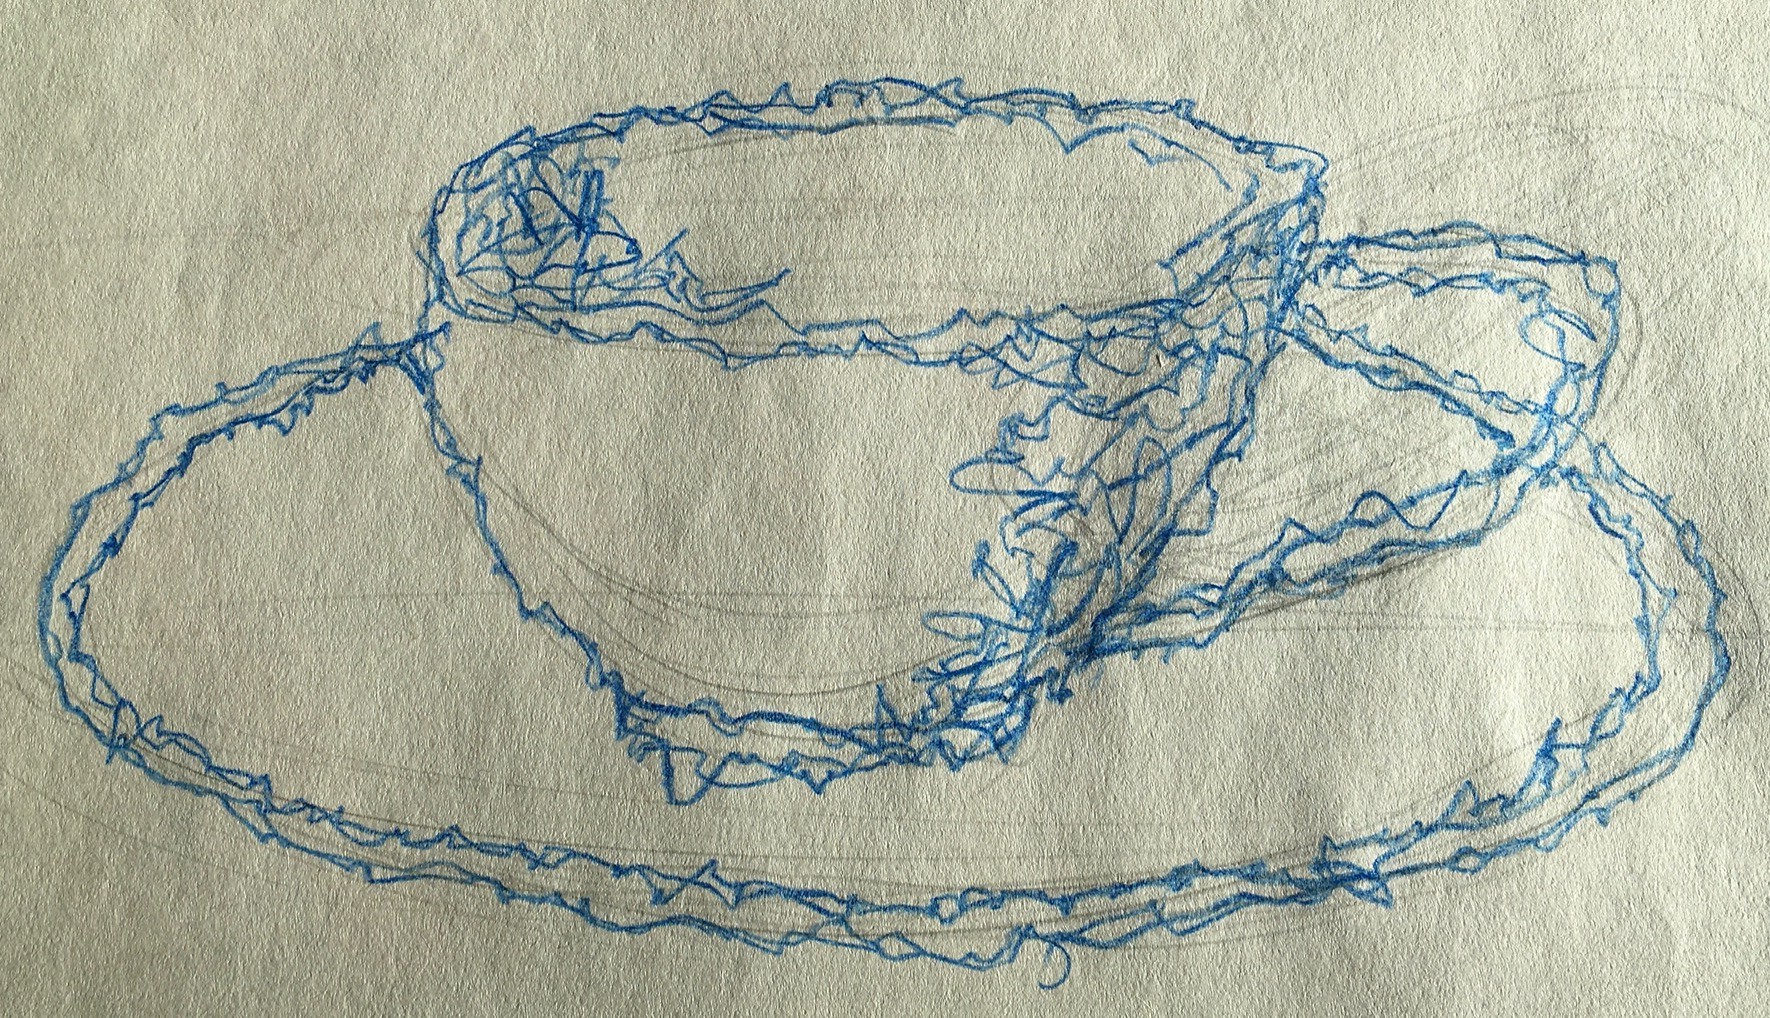 Teacup, 2018
Pencil and Blue Colored Pencil on Paper
9.5"W x 5"H, Walli White, artist